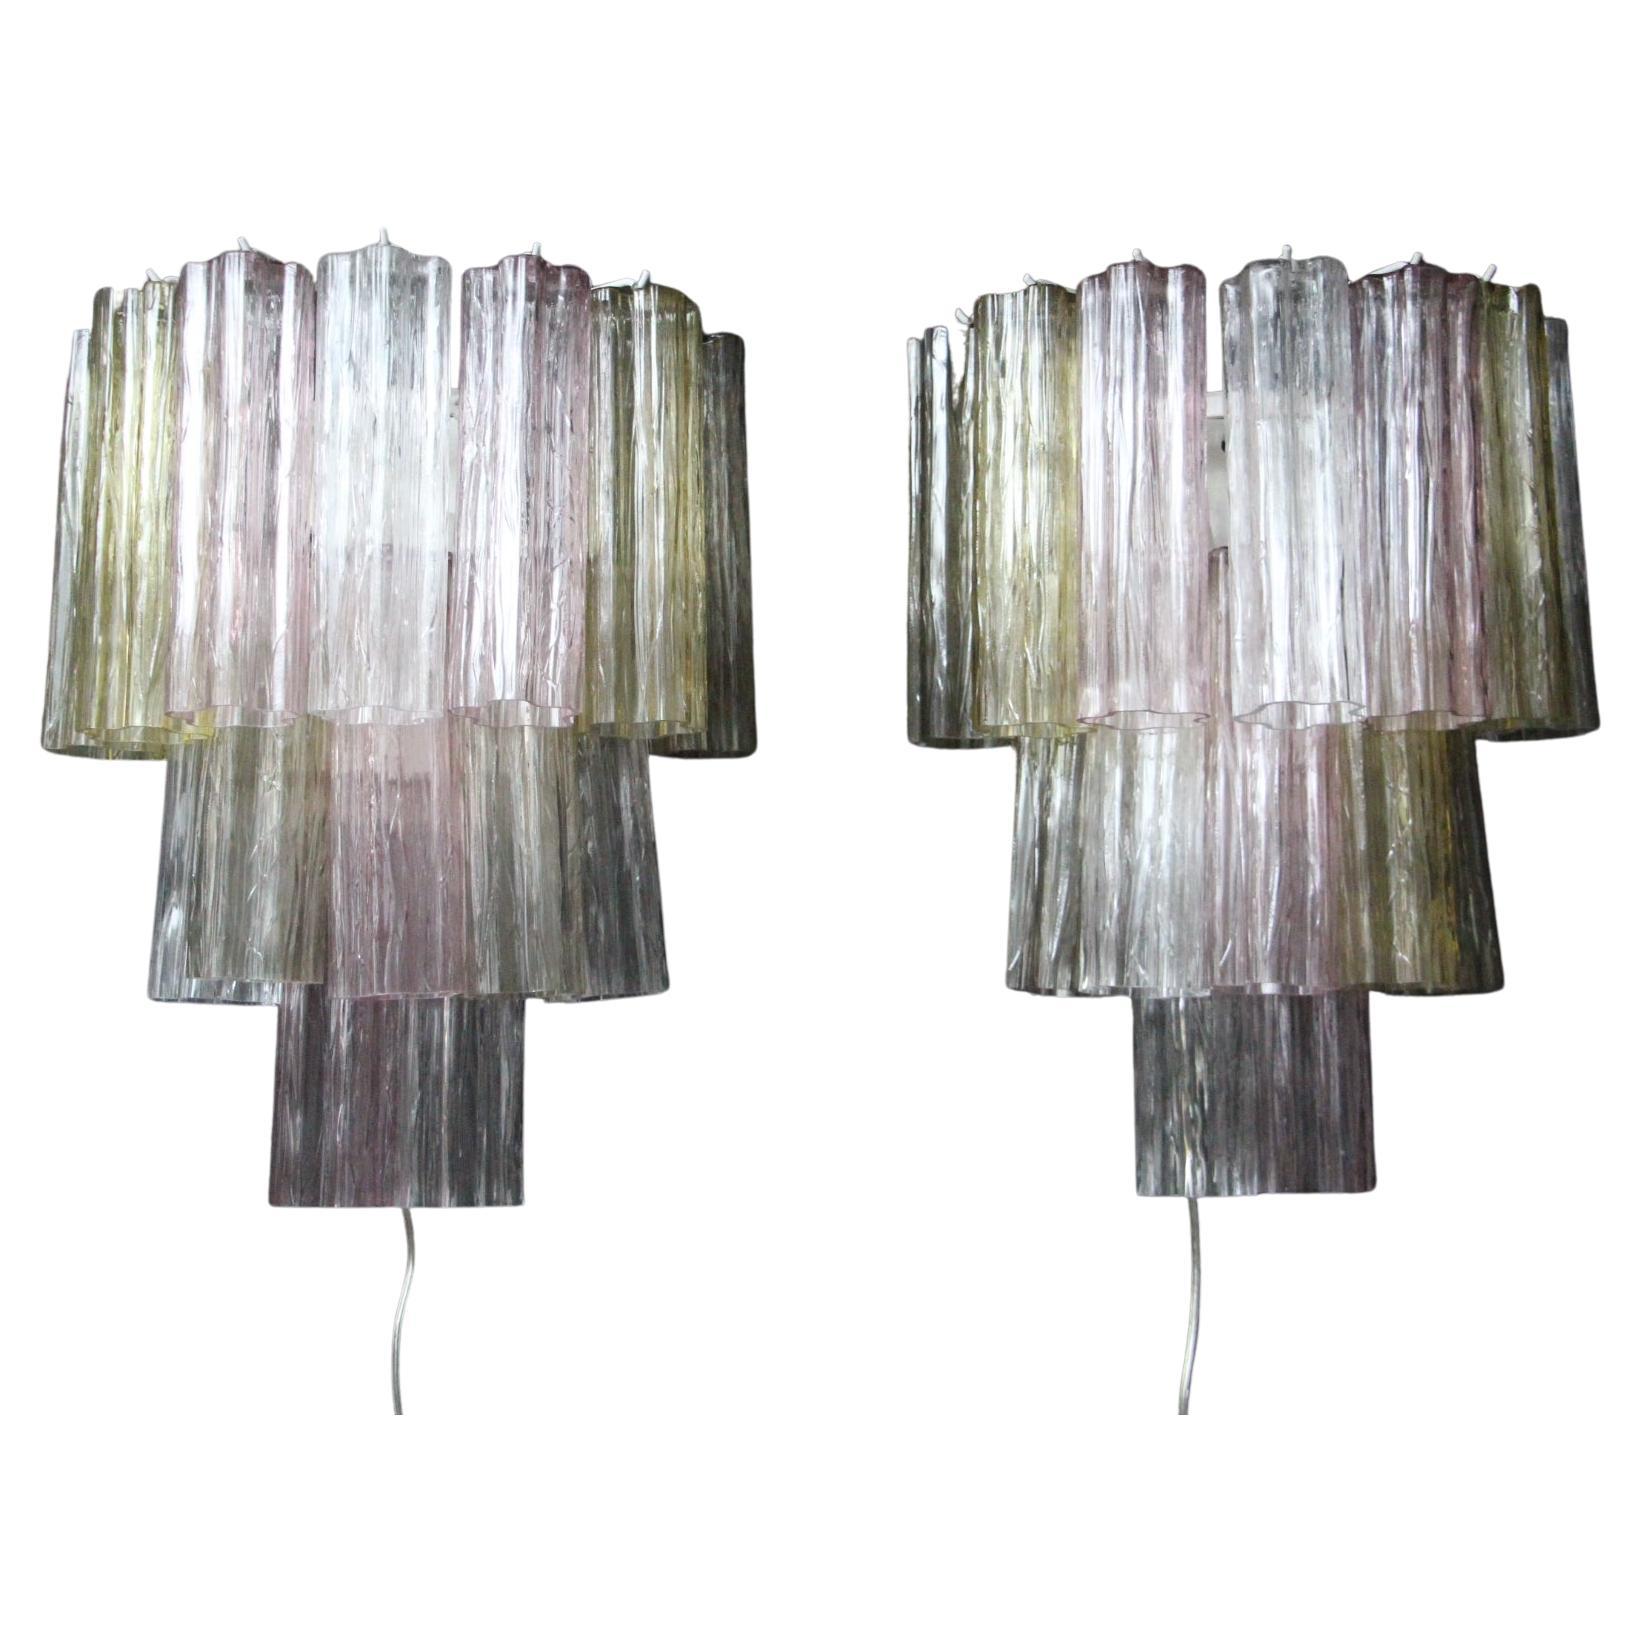 Pink, White, Yellow and Smoked Color Venini Style Tronchi Wall Lights, Sconces For Sale